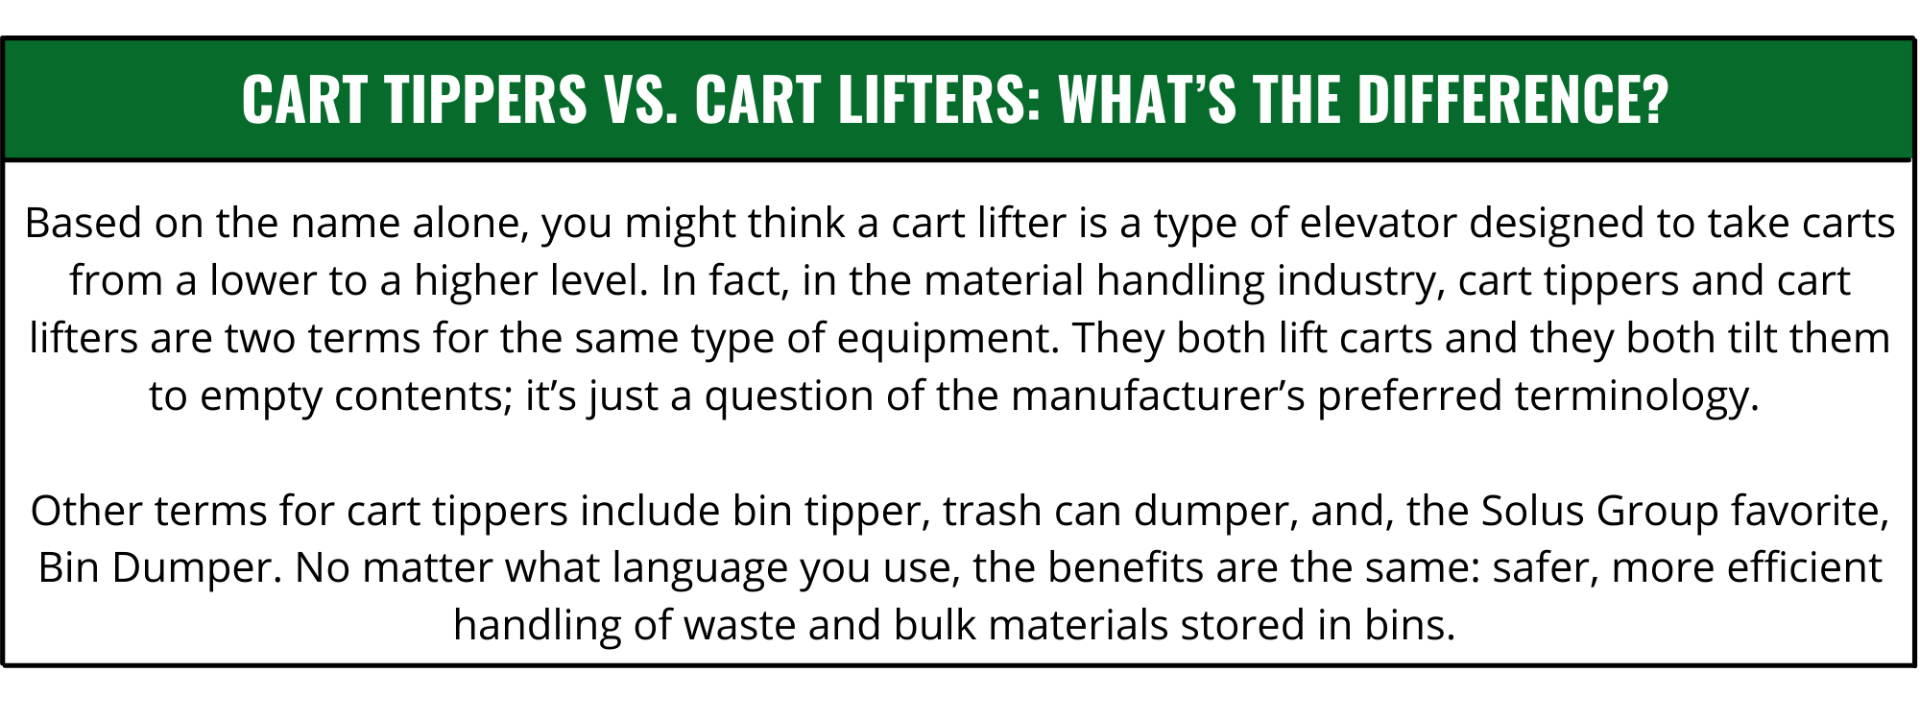 Cart Tippers Vs. Cart Lifters: What’s the Difference?